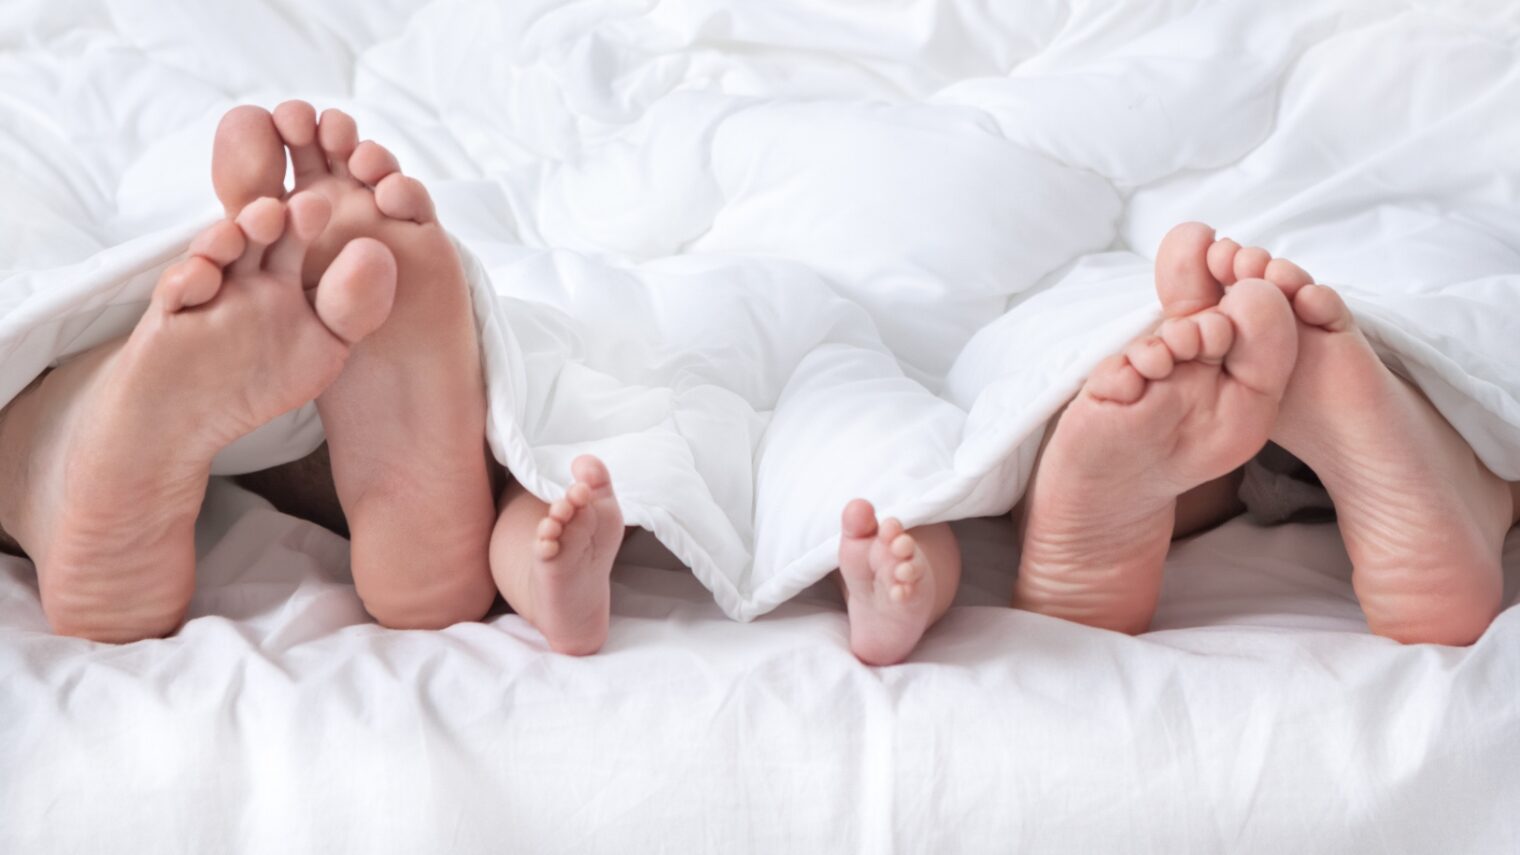 Get pregnant on February 29, 2016 at Hotel Yehuda and you baby is set for life. Image via Shutterstock.com